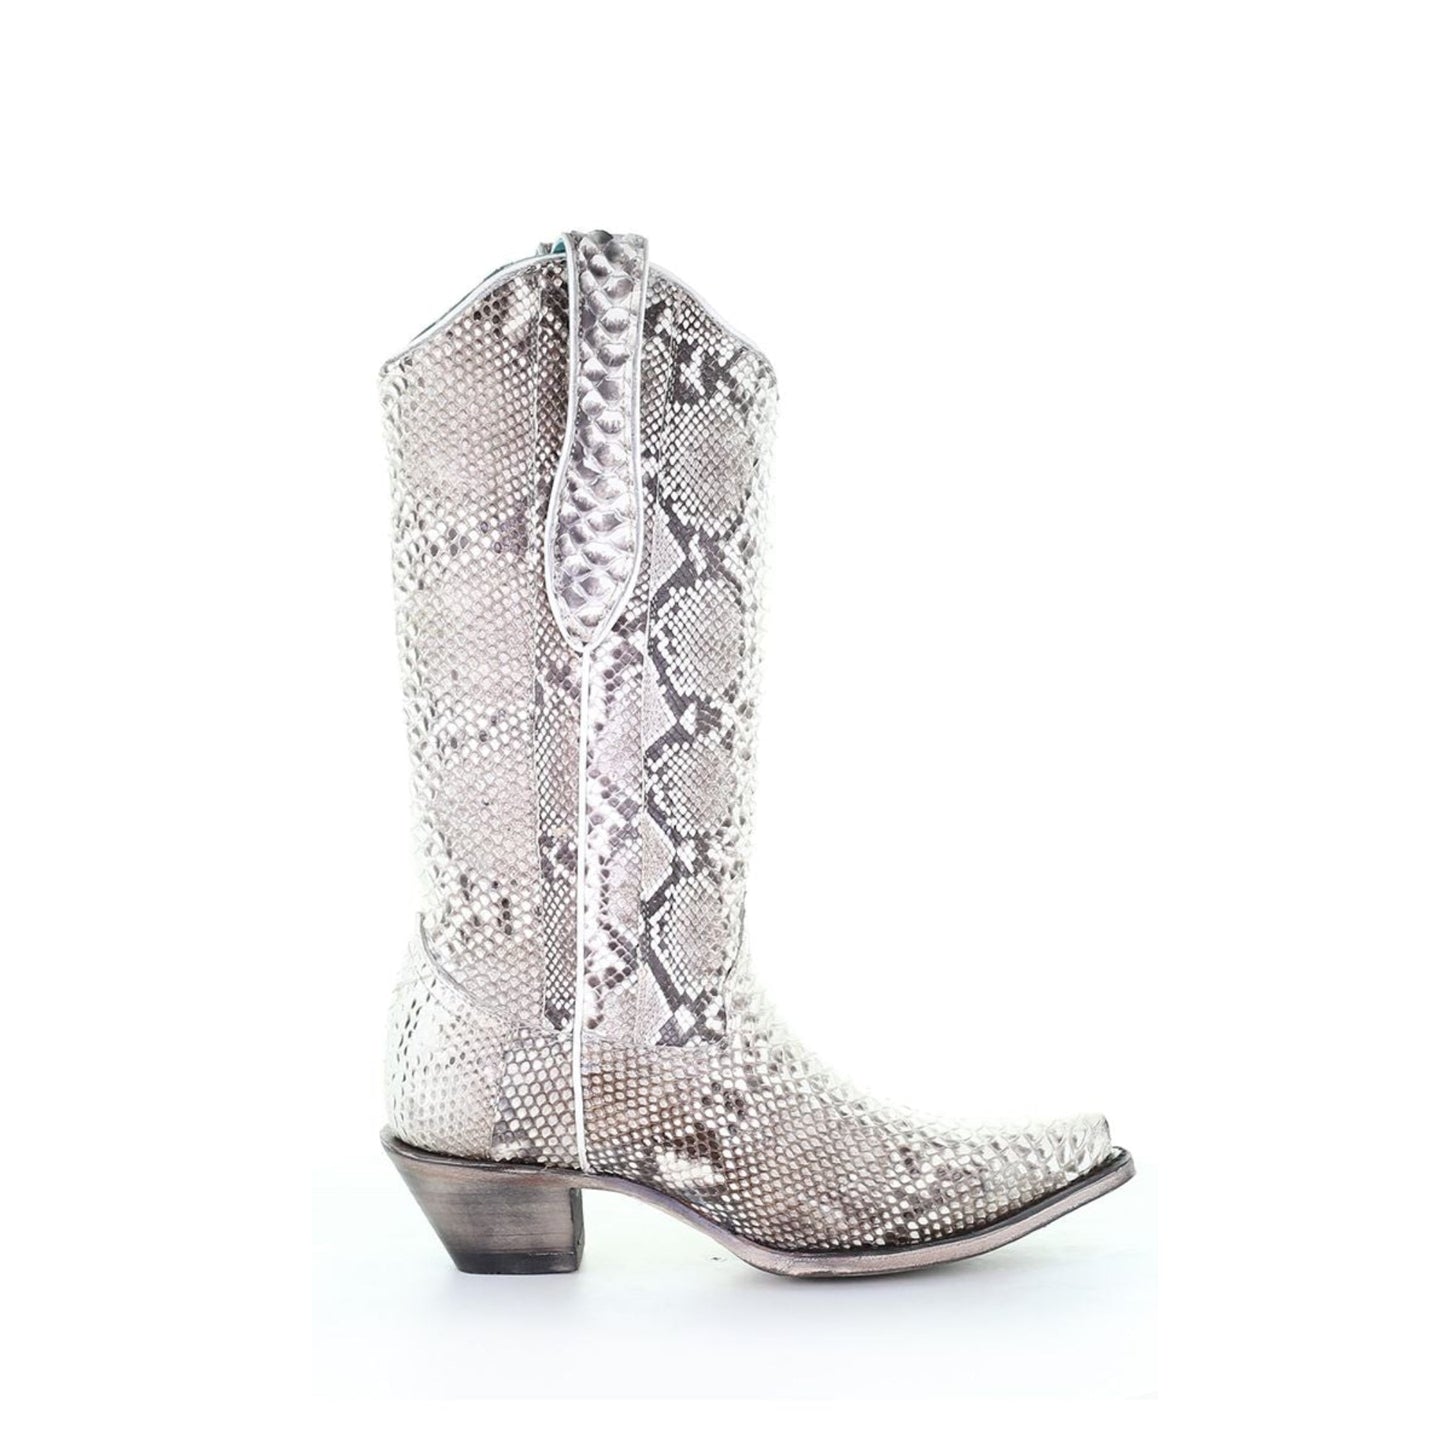 A3798 - Corral western cowboy python snip boots for women-BOOTS-kuet